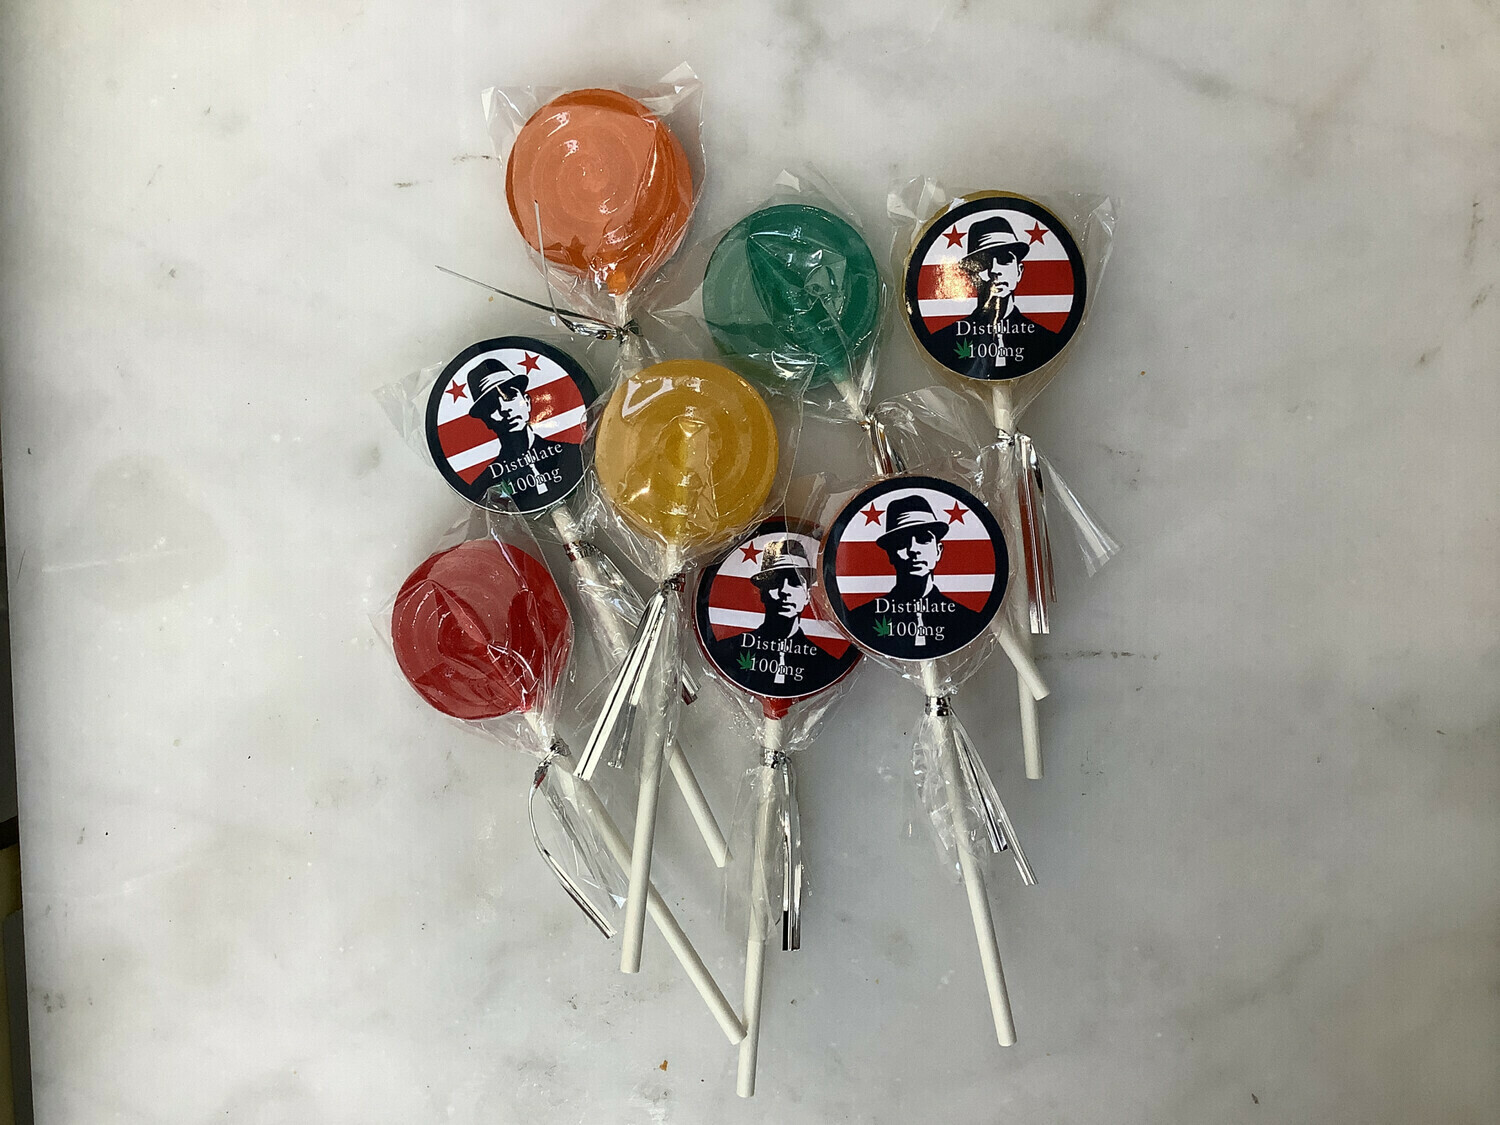 THC Candy Lollipops -Optional Cannabis Gift (Legal Coupon Purchase)